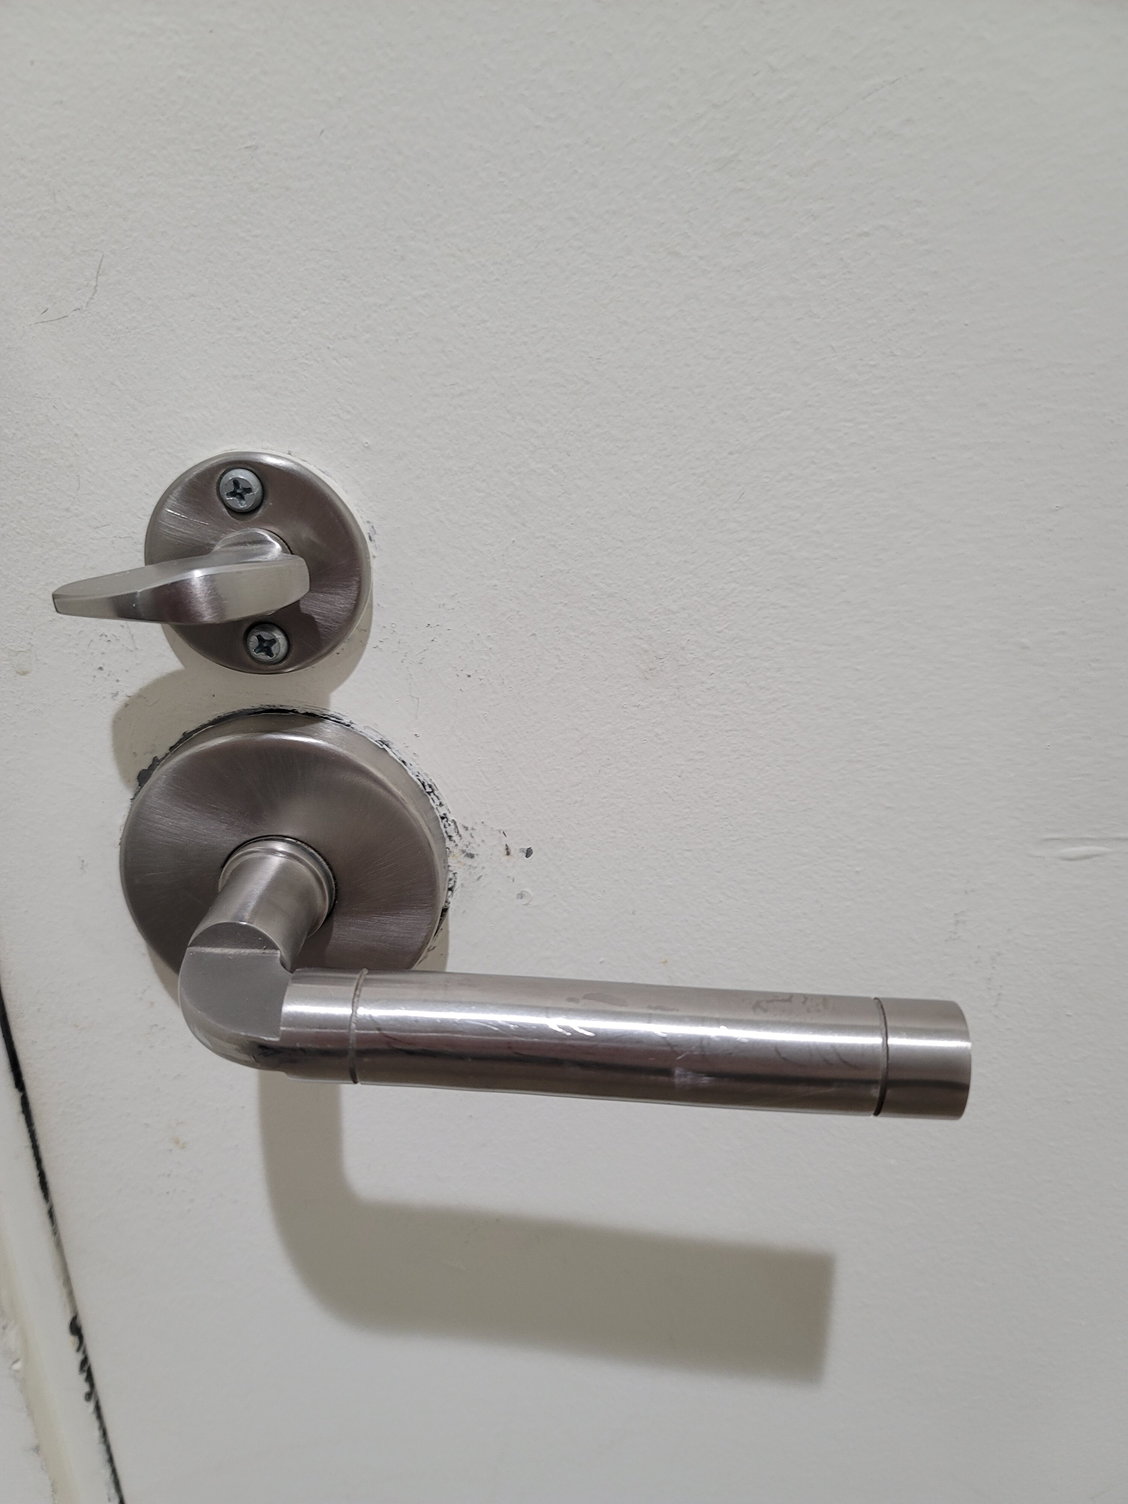 How to Remove Door Knob without Screws, Latch, or Slot